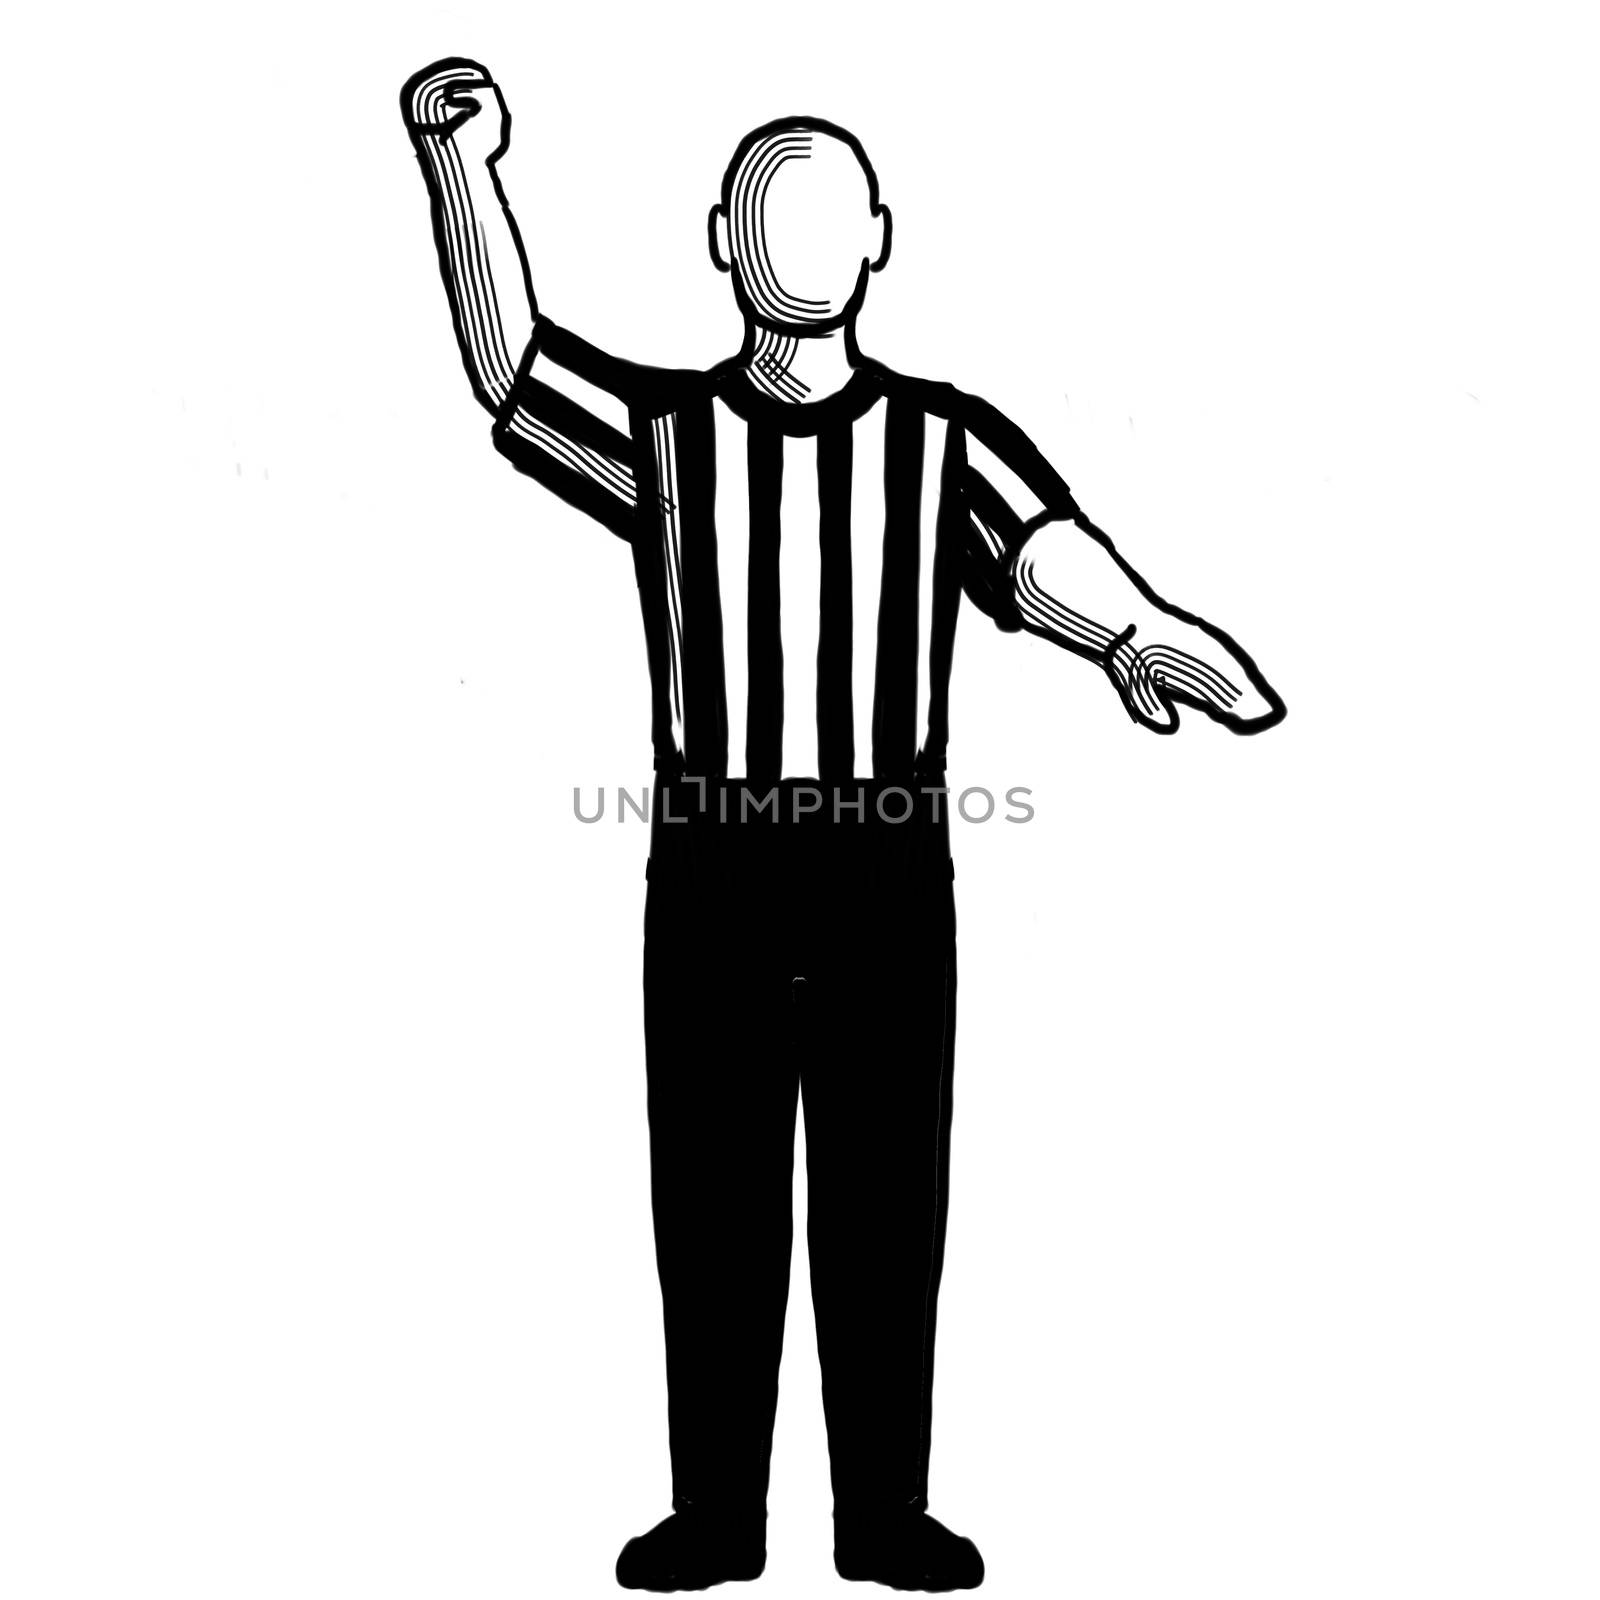 Basketball Referee stop clock for foul Hand Signal Retro Black and White by patrimonio